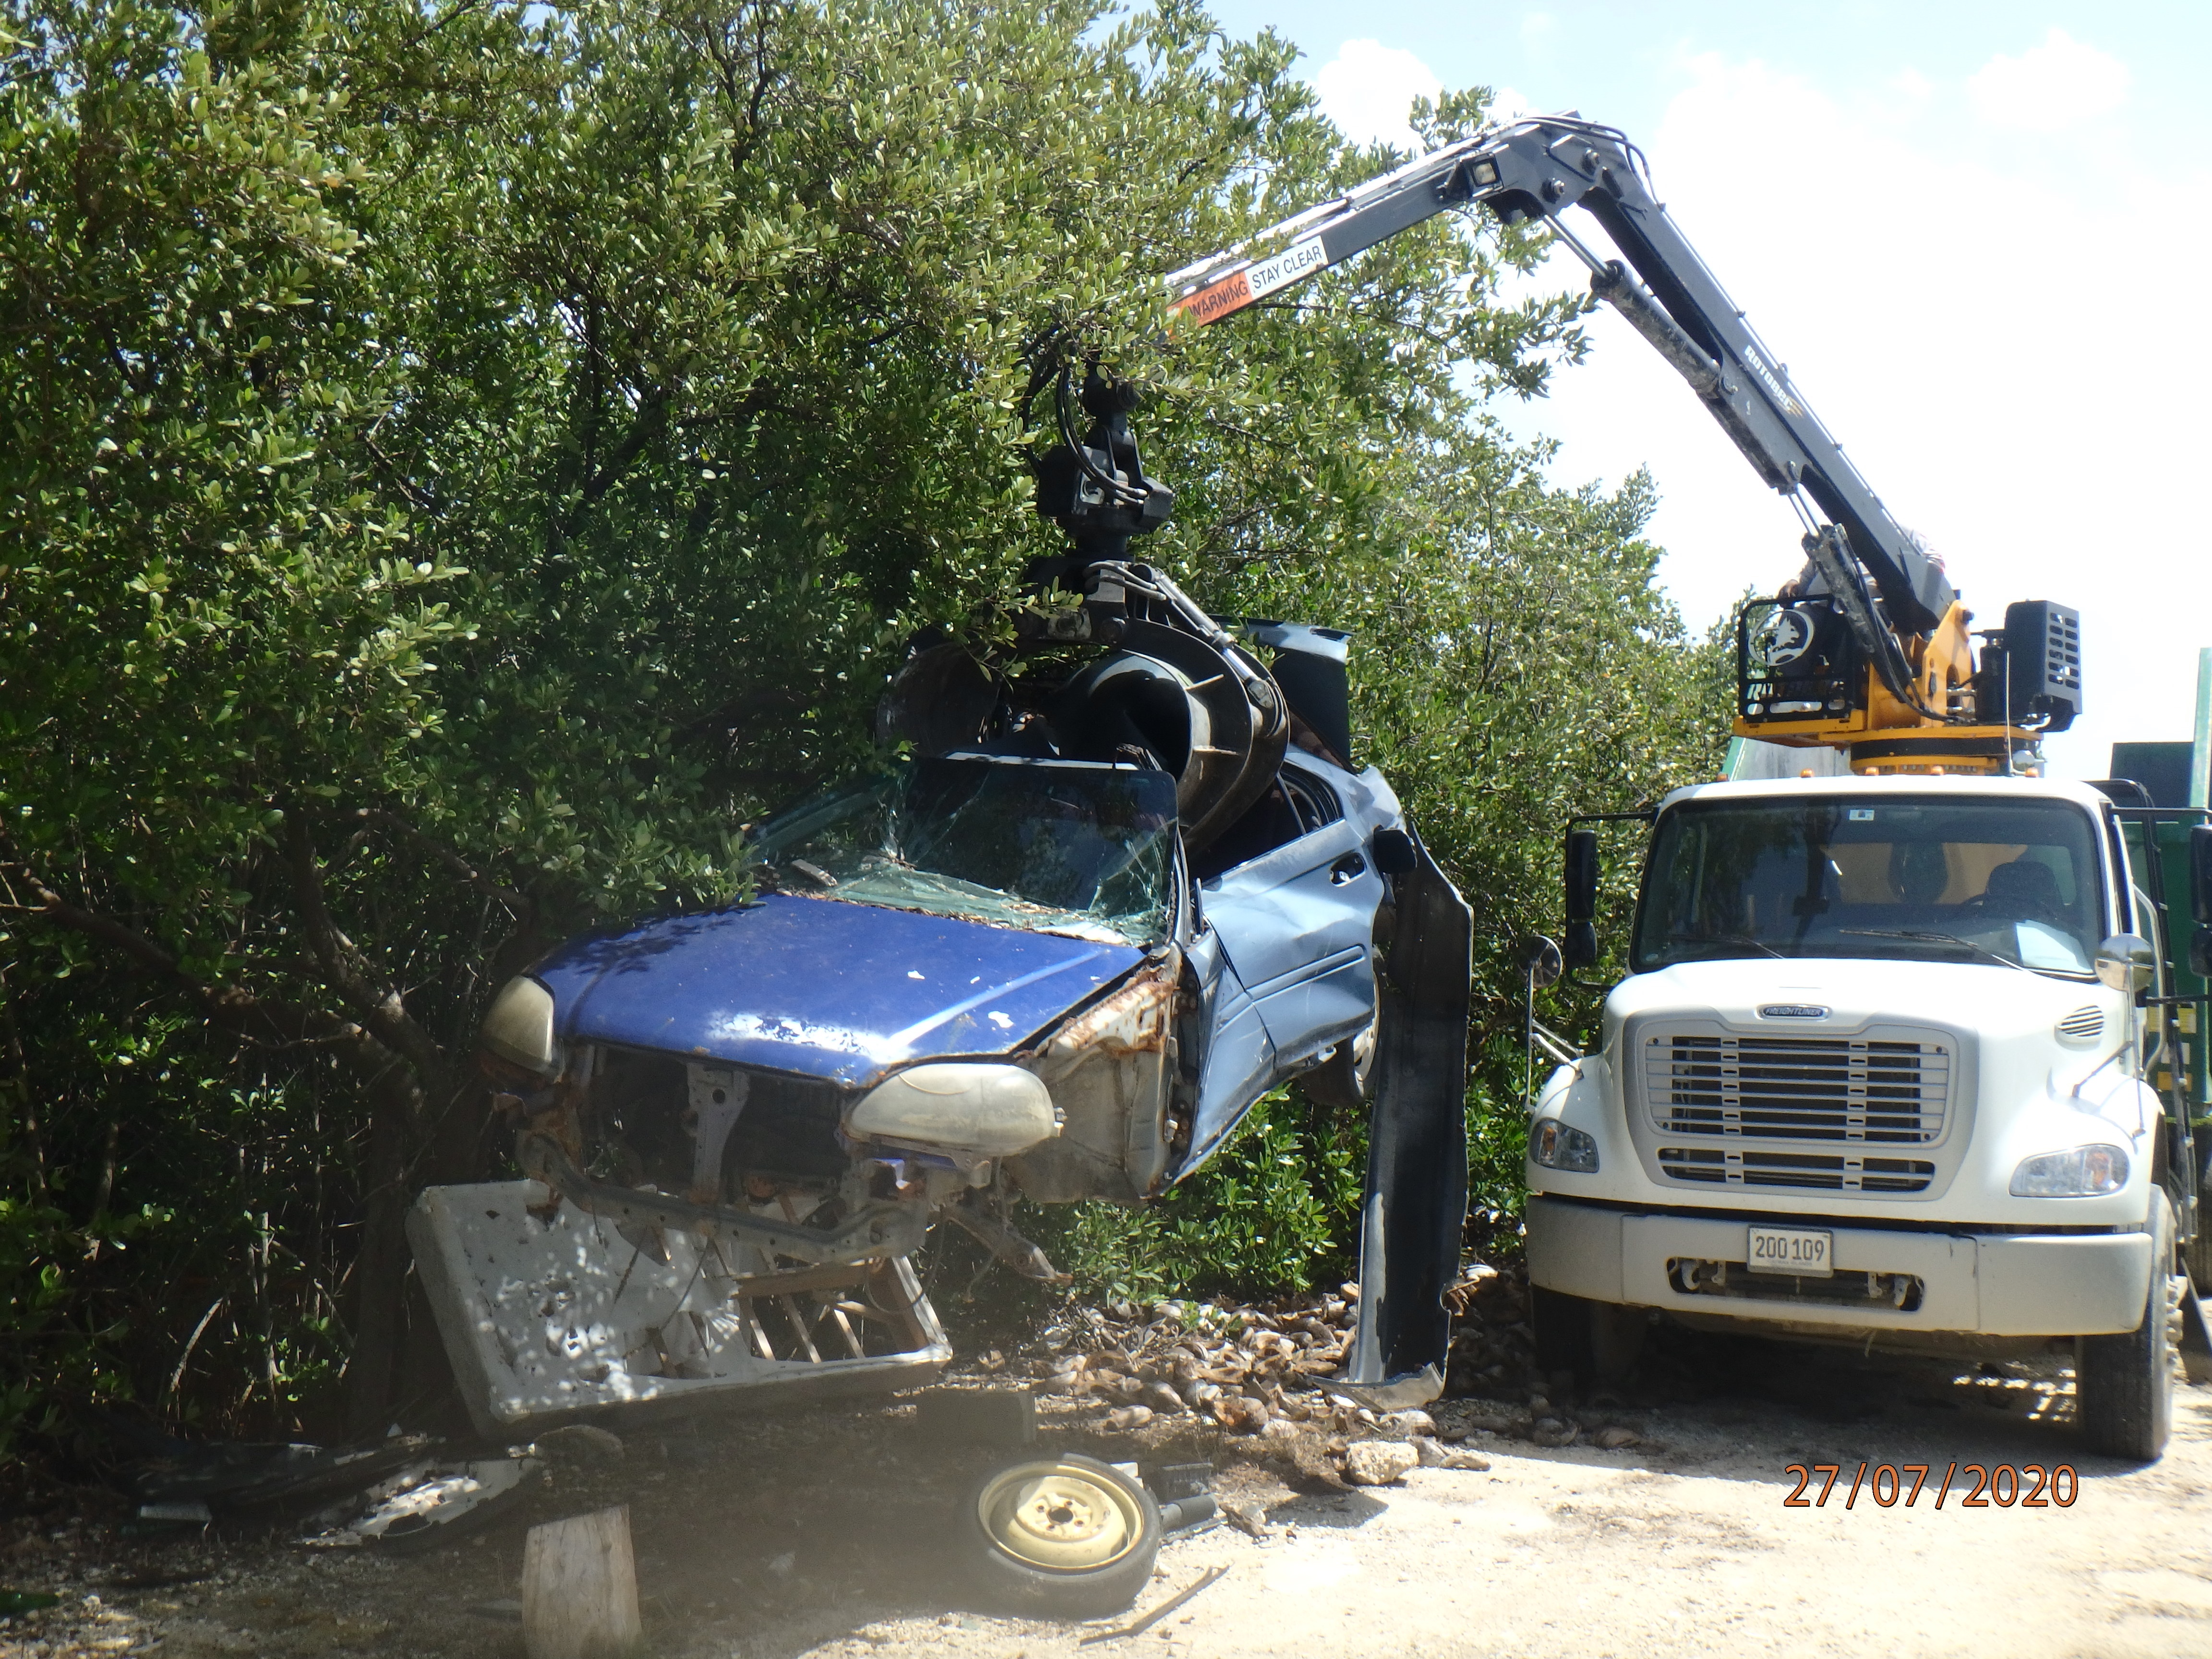 Removal of Blue Derelict Car